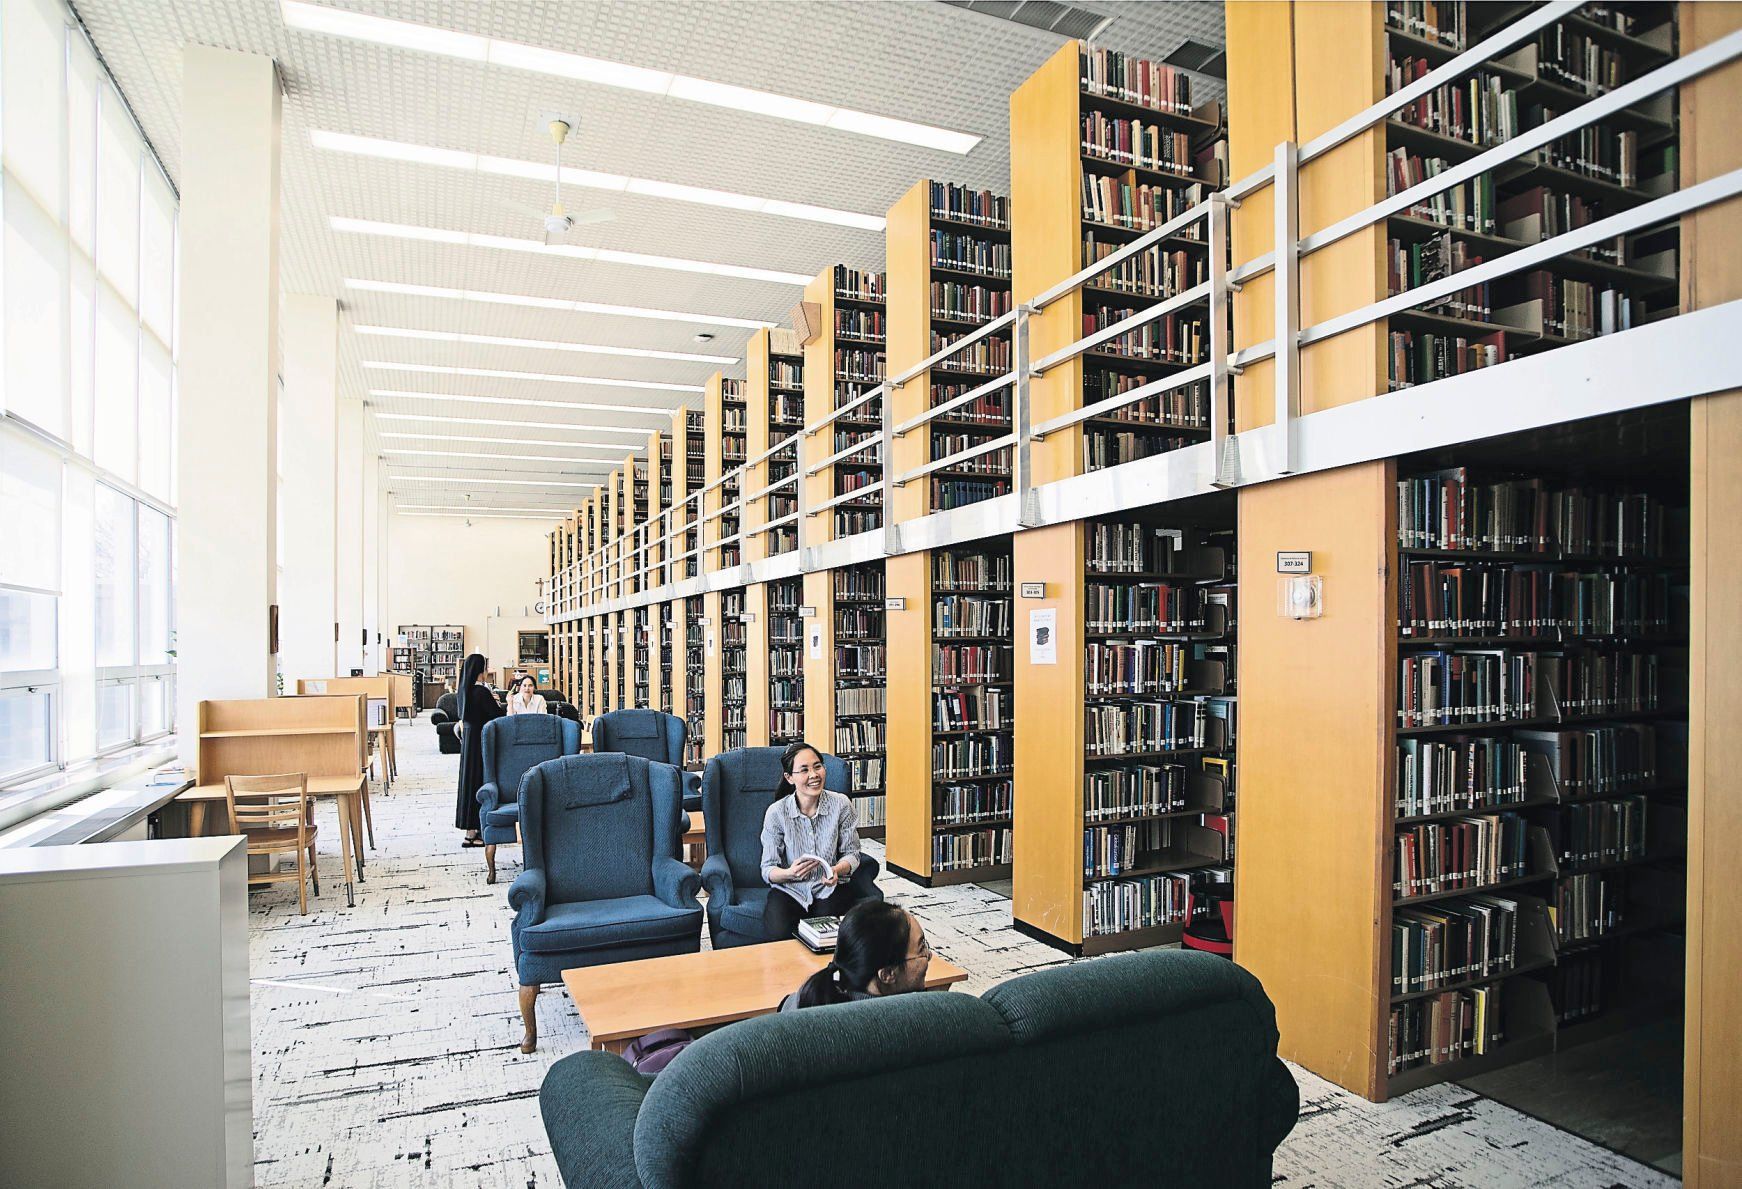 Students study in the library at the college.    PHOTO CREDIT: Stephen Gassman